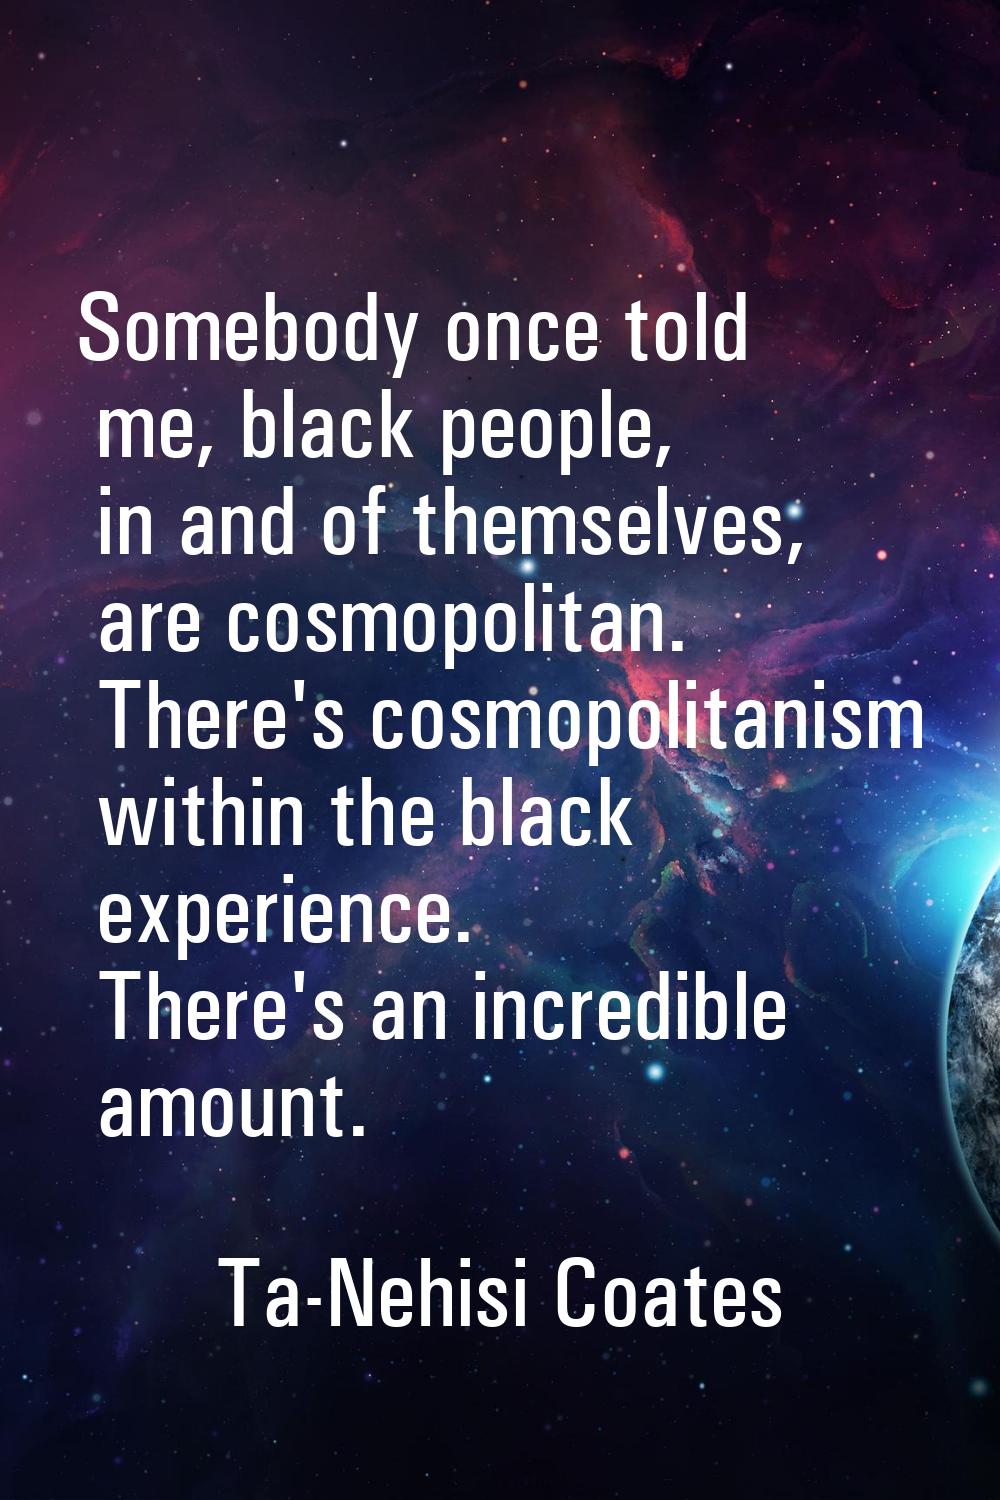 Somebody once told me, black people, in and of themselves, are cosmopolitan. There's cosmopolitanis